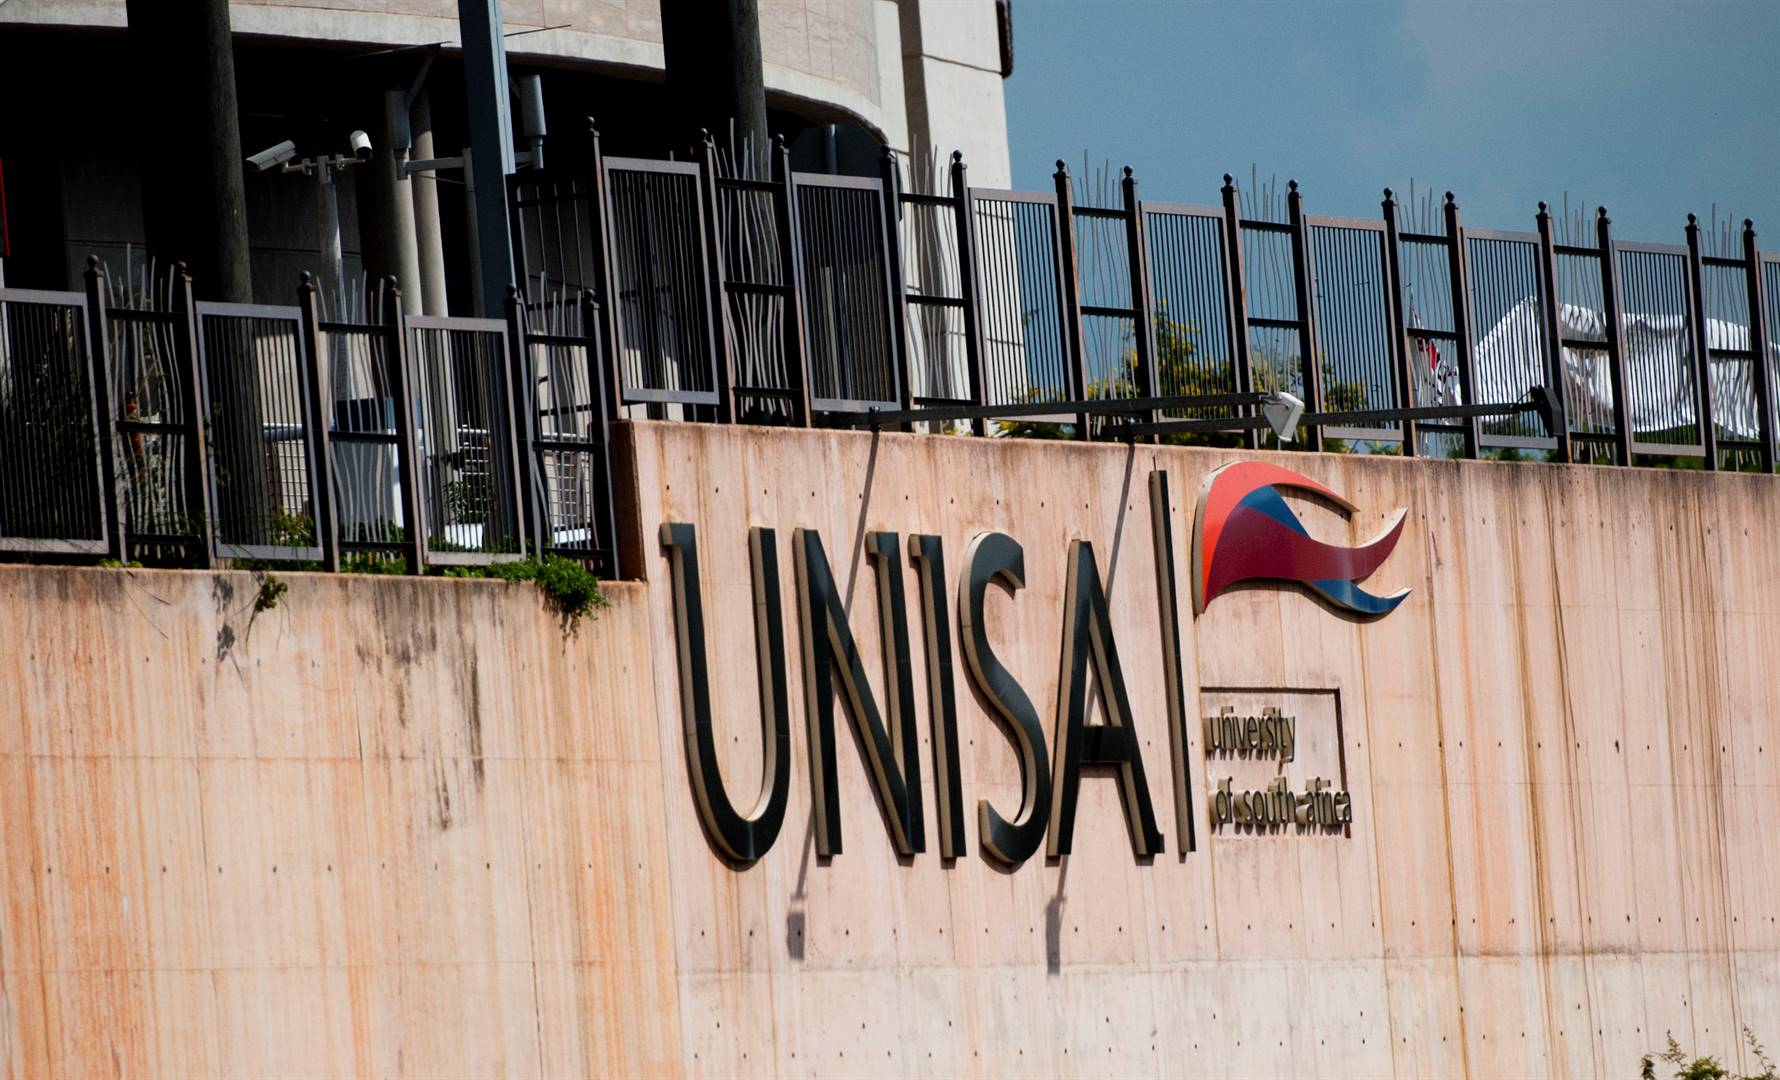 Unisa's acting vice-principal for finance, supply chain management and business enterprise Reshma Mathura received four "unsolicited" deposits into her account. (Argief/Gallo Images)